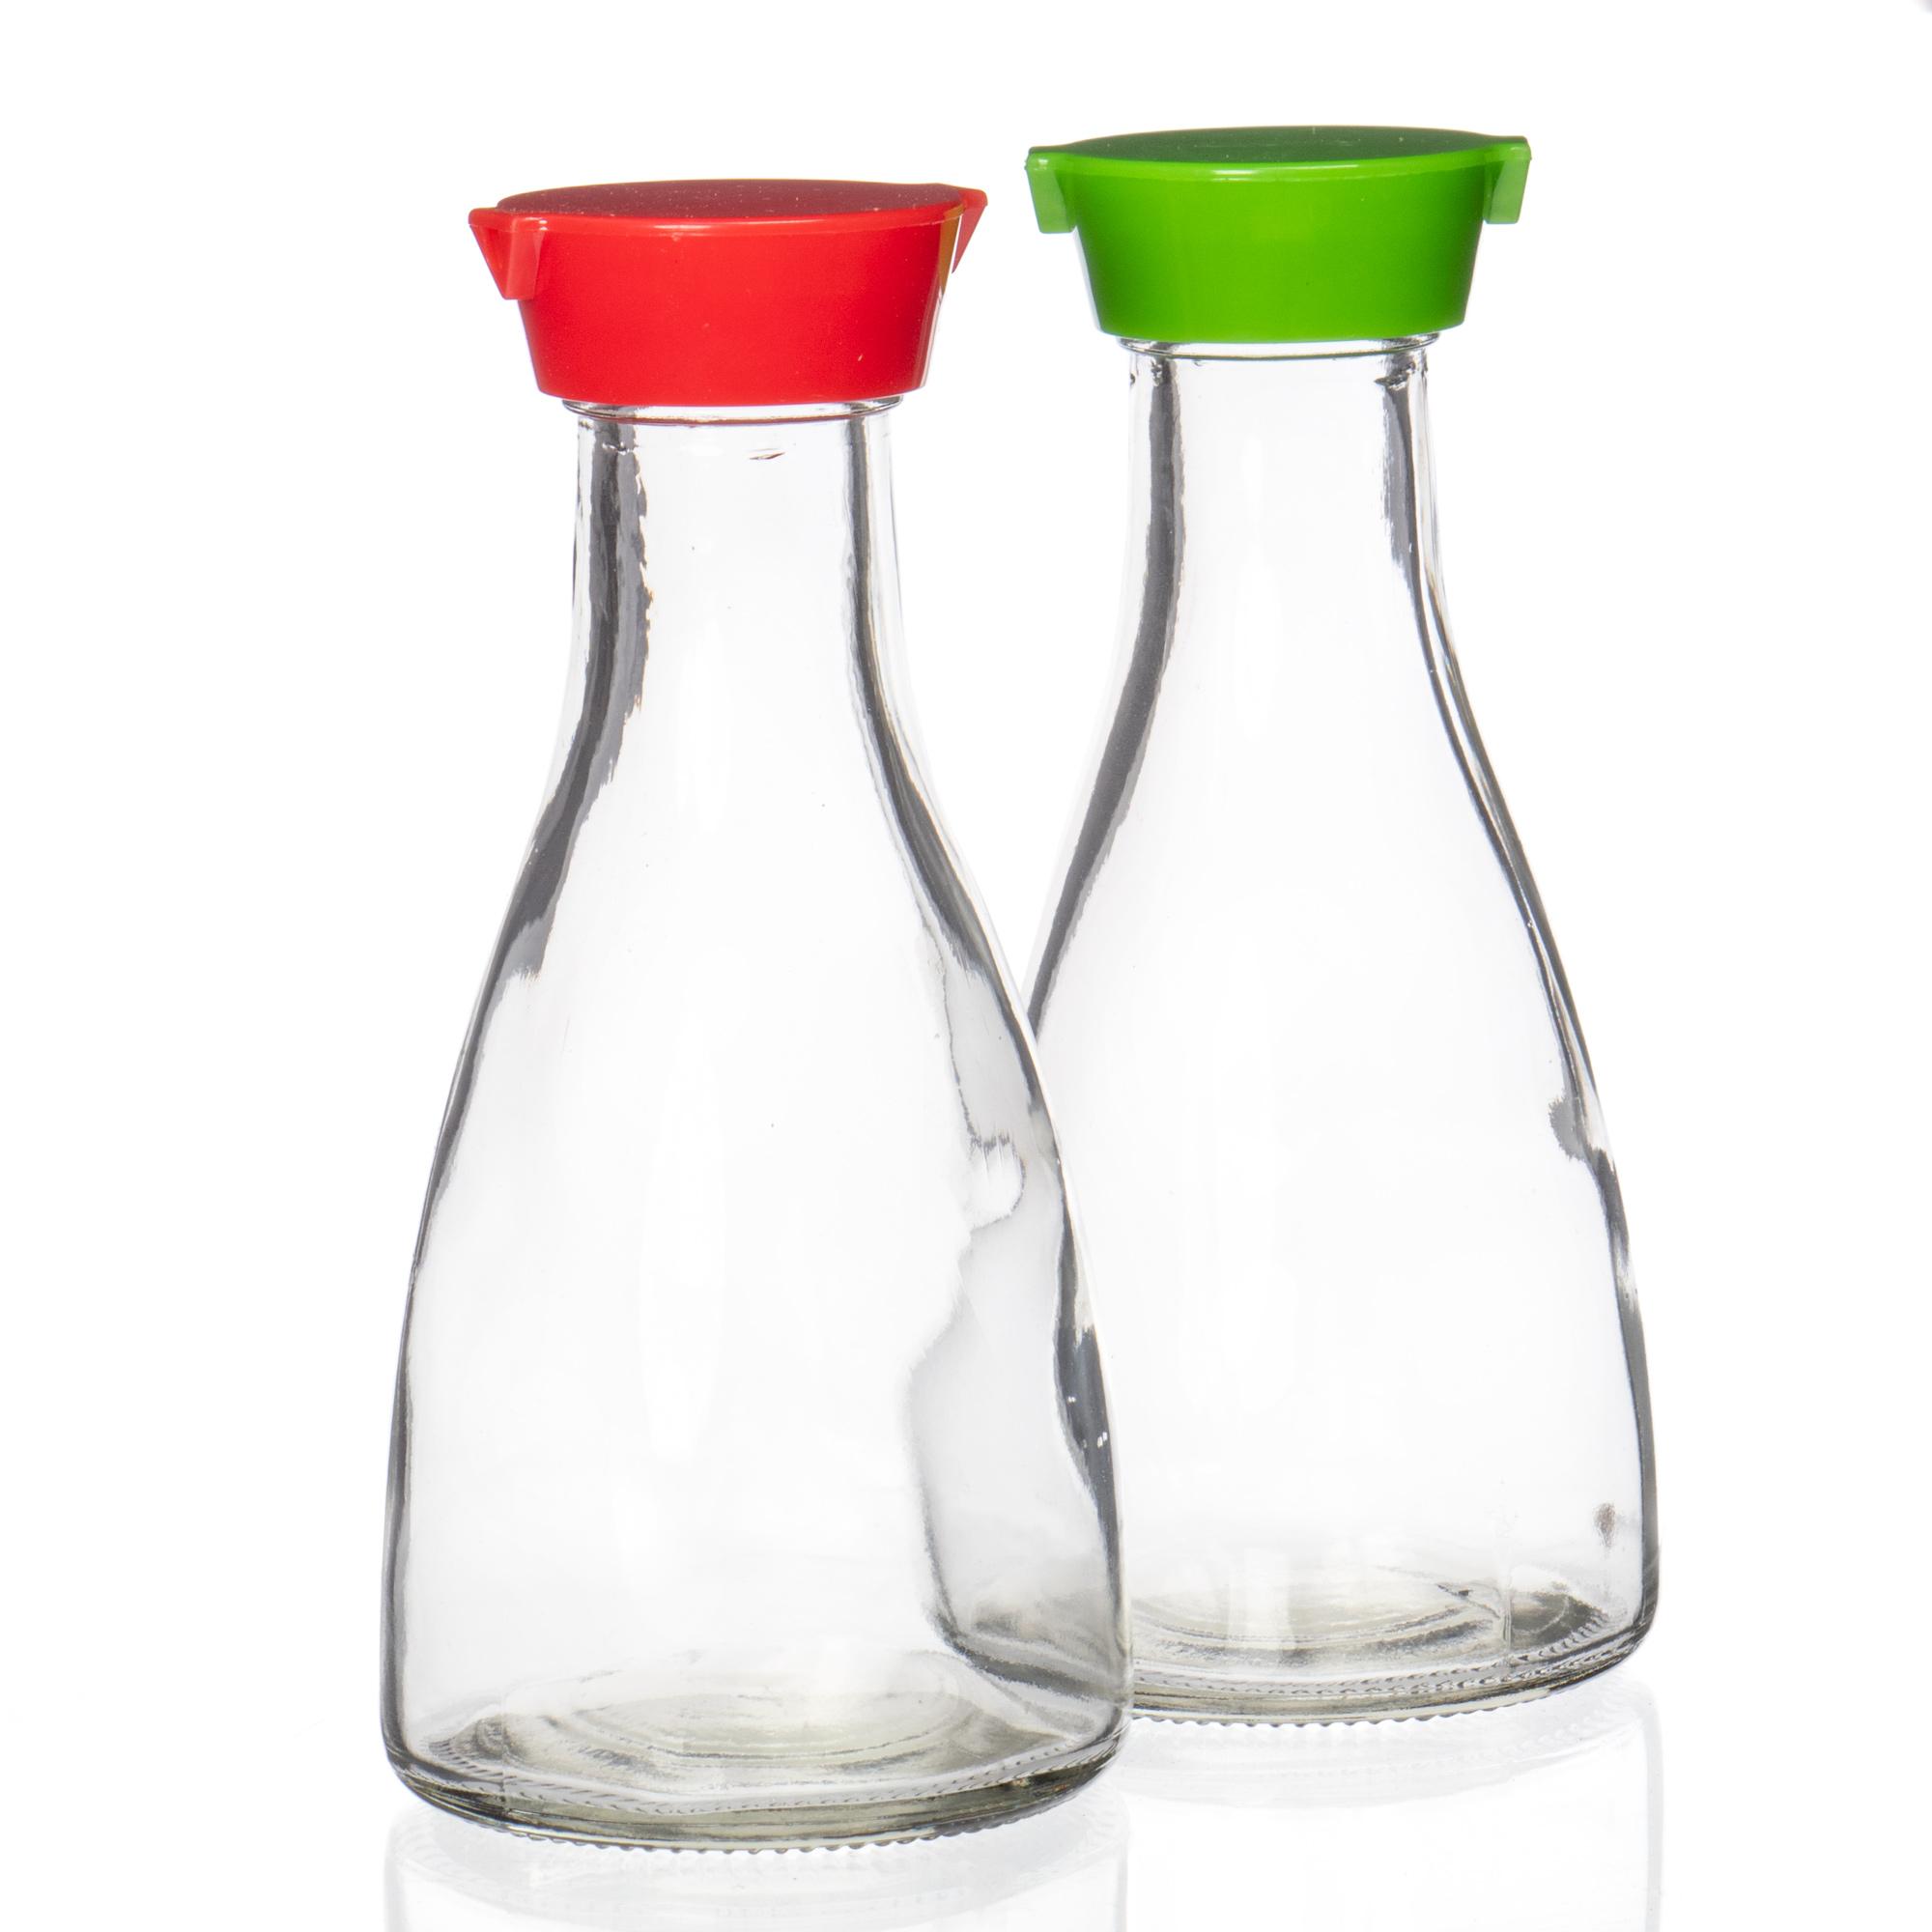 Soy Sauce Bottle 2-pack Red/Green